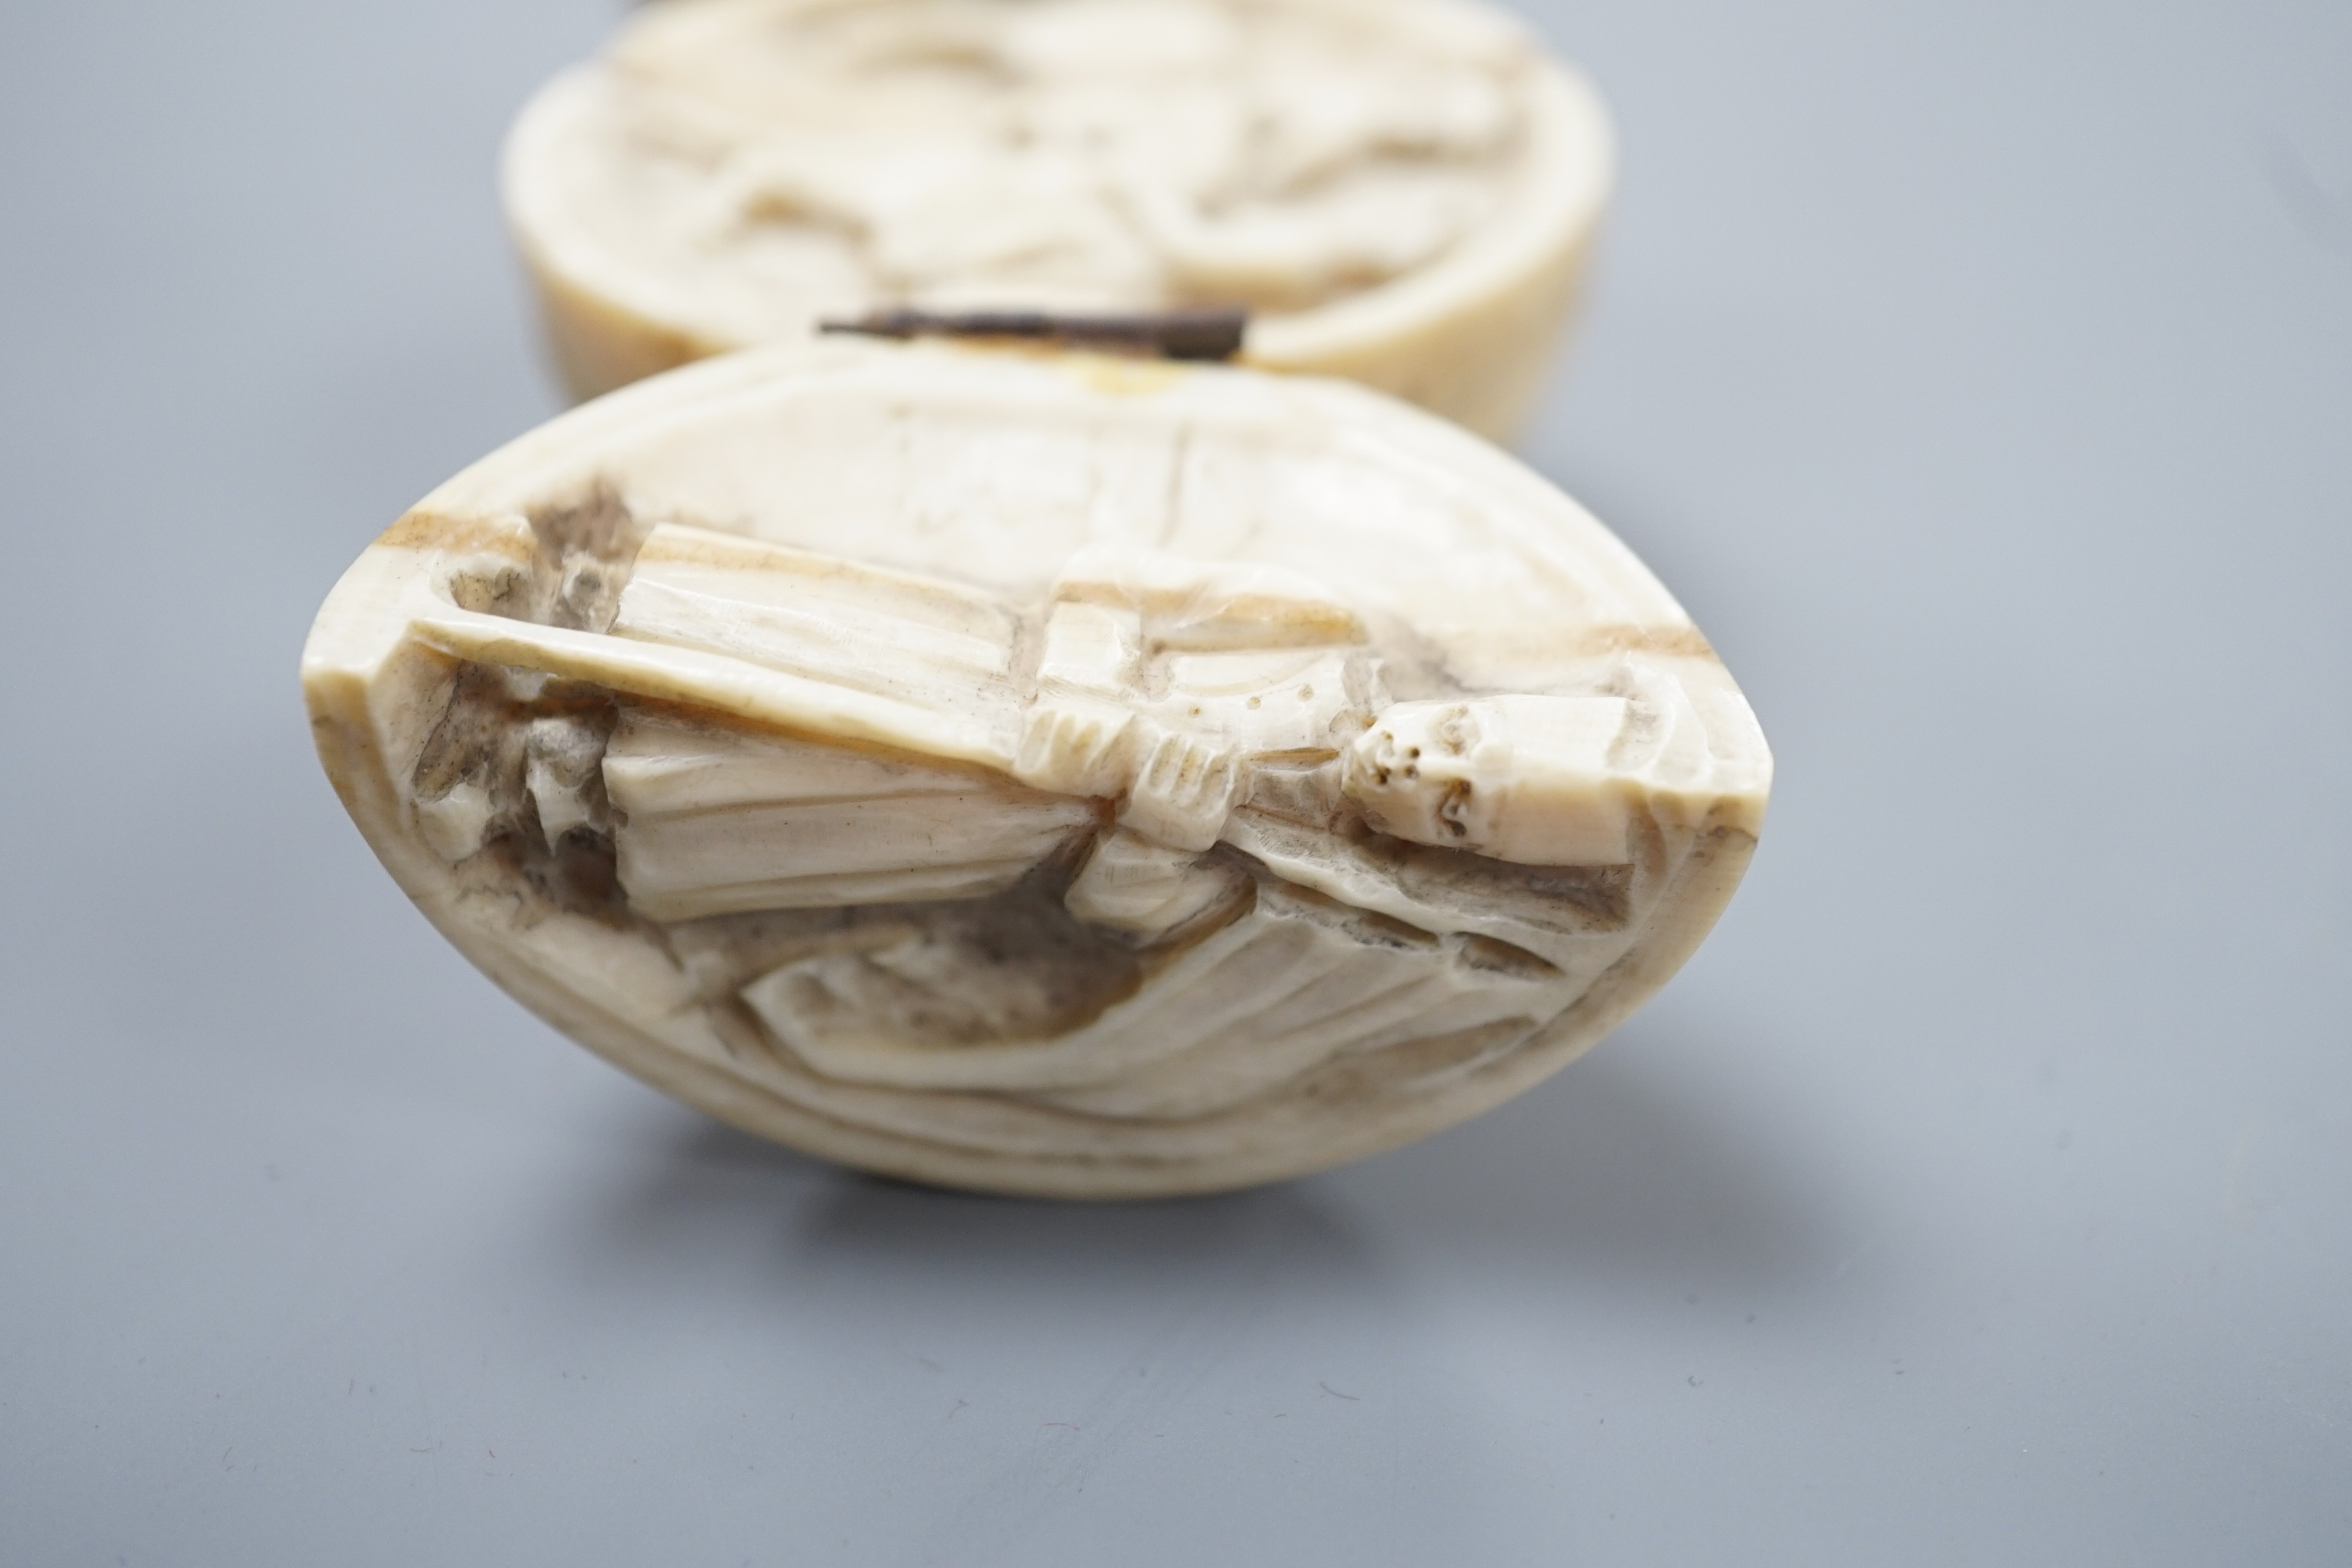 A 19th century Dieppe ivory globular triptych, possibly depicting Crimean war figures, 5.4cm diameter closed